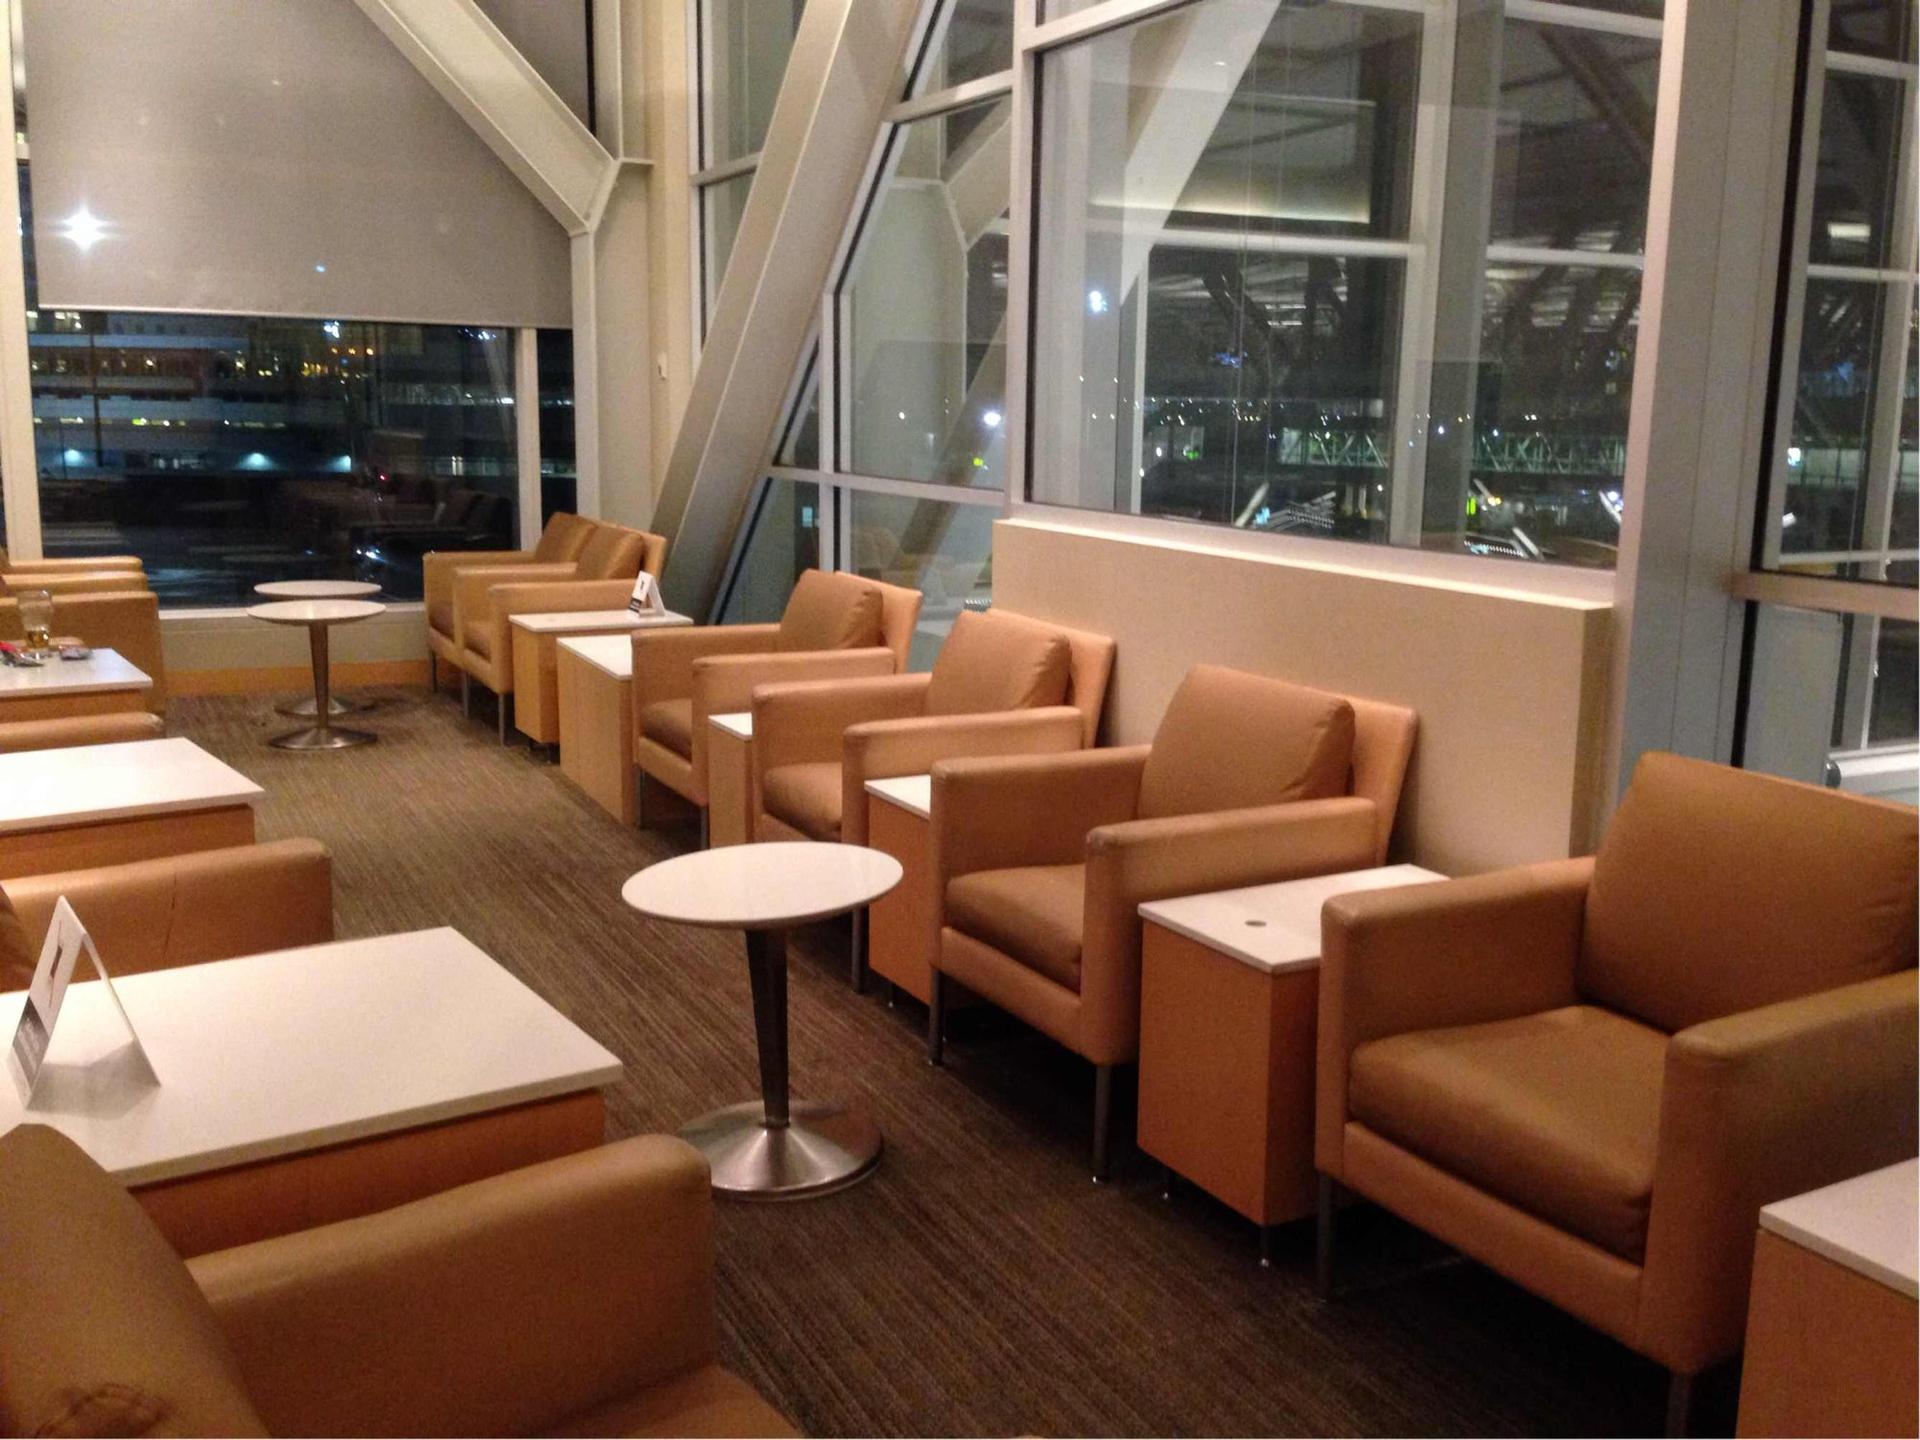 Air Canada Maple Leaf Lounge image 5 of 17